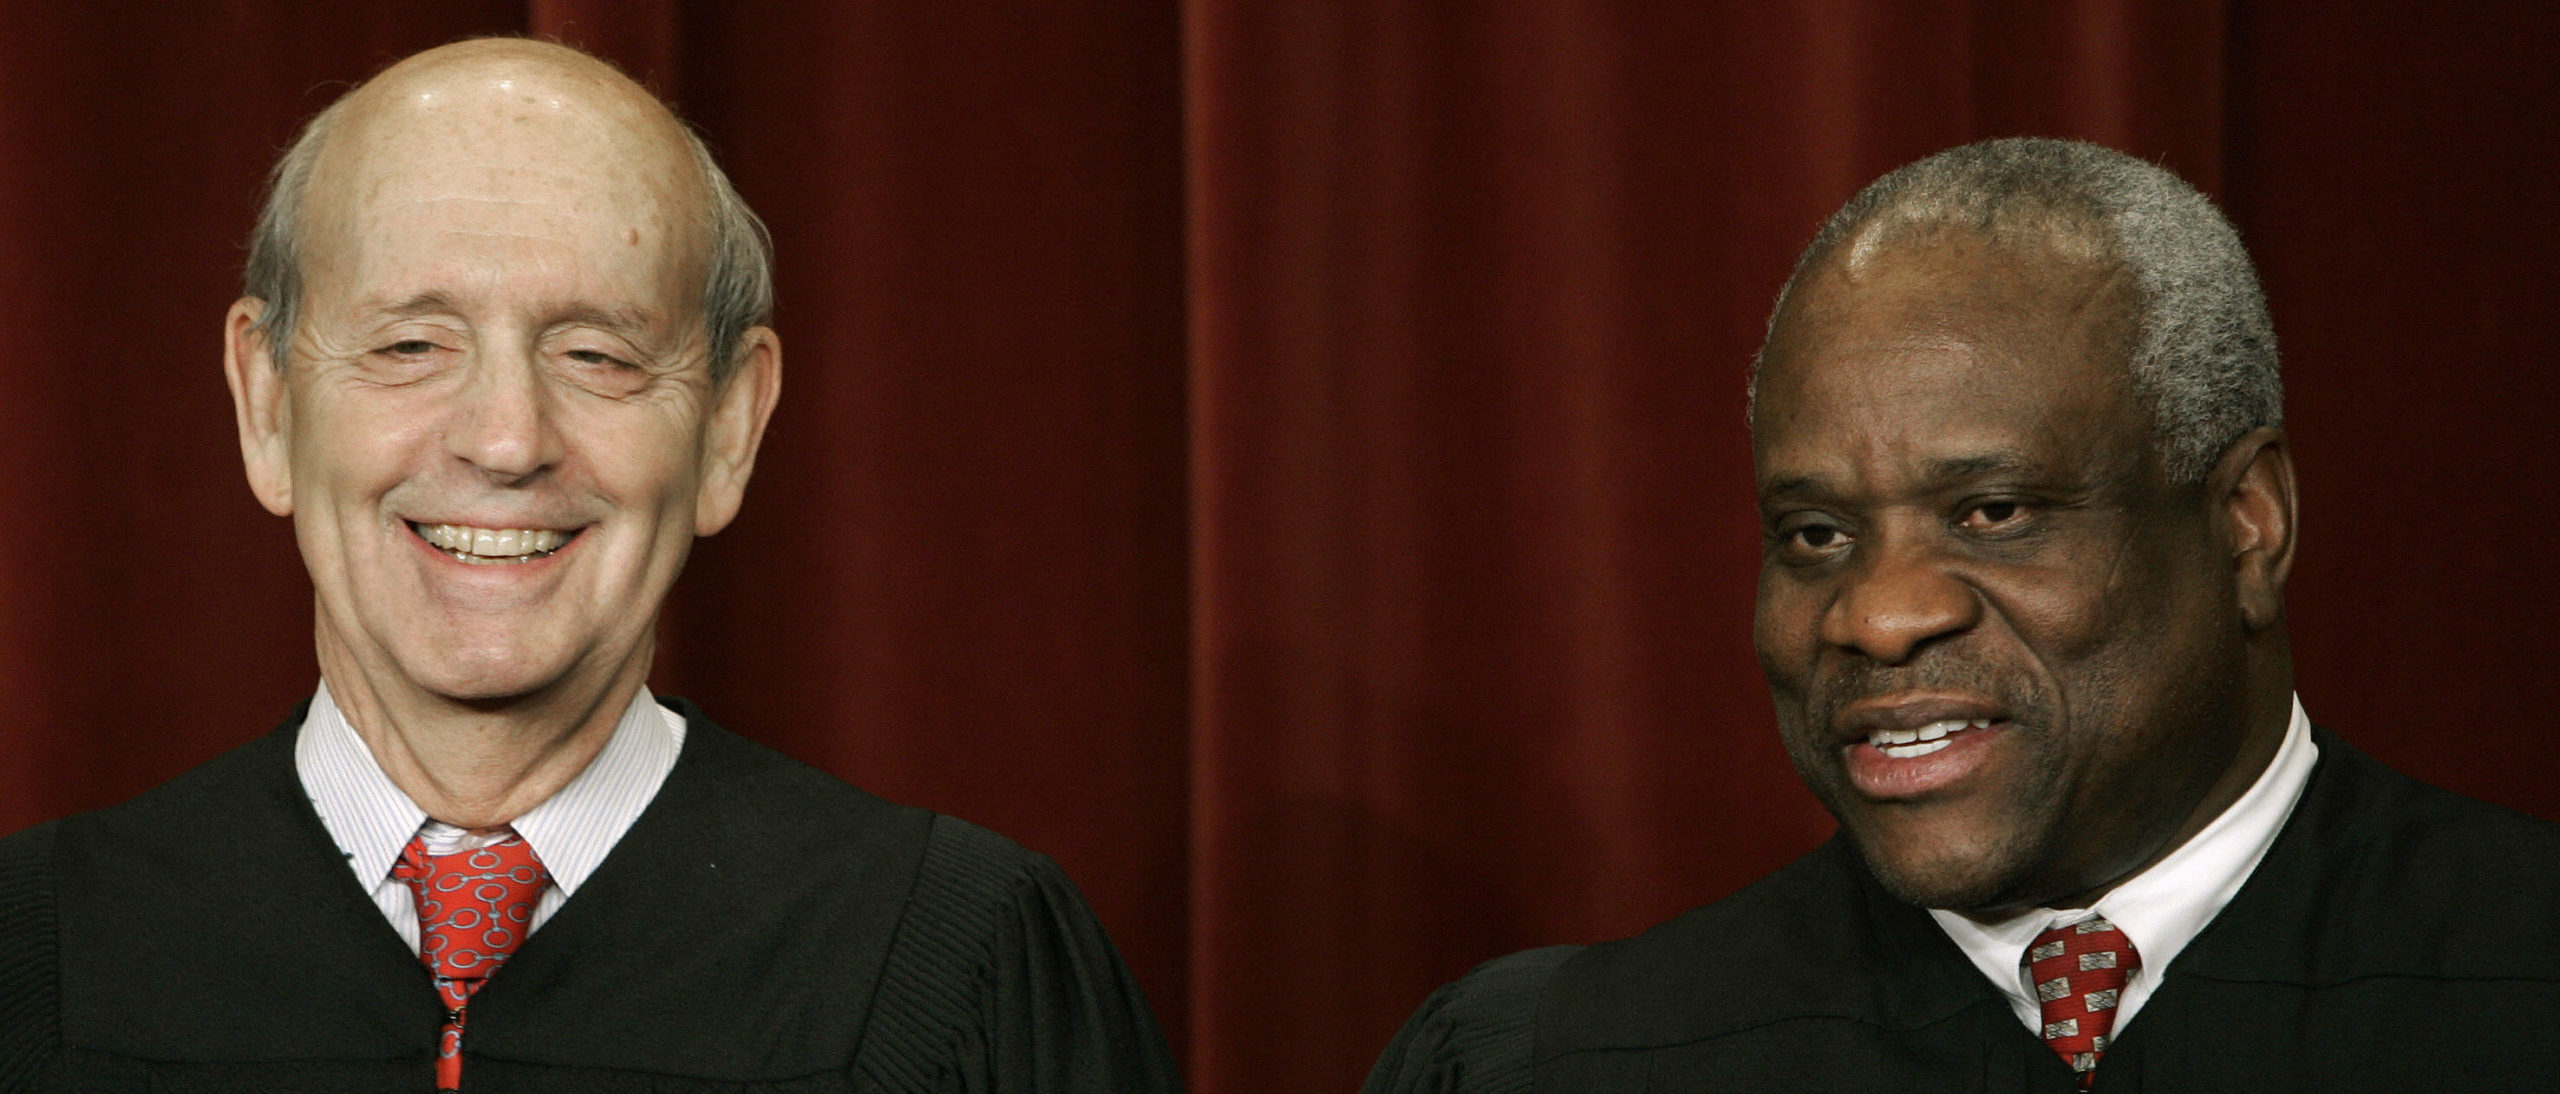 US Supreme Court Justices Stephen Breyer and Clarence Thomas